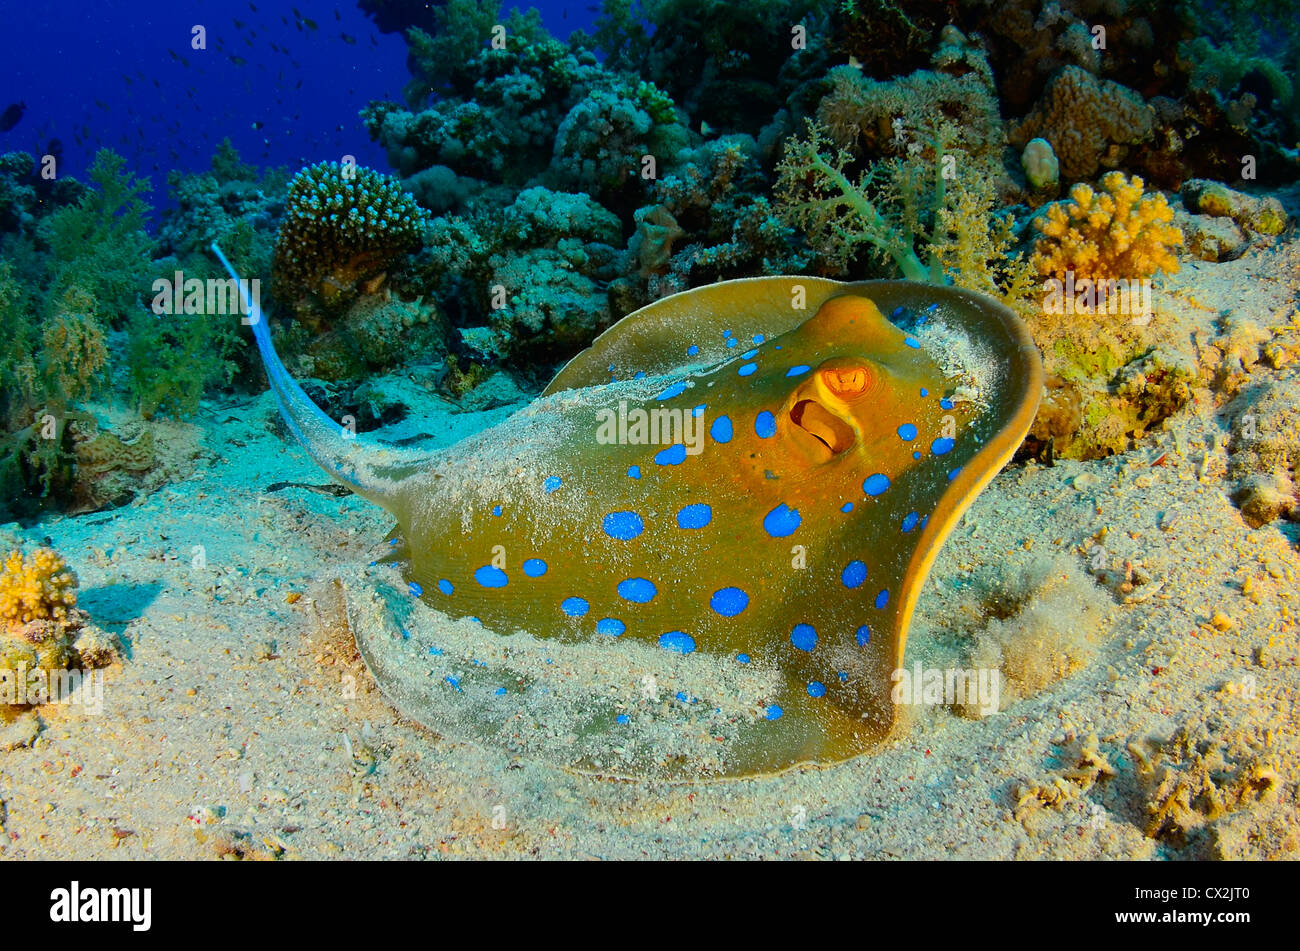 Red Sea, underwater, coral reef, sea life, marine life, ocean, scuba diving, vacation, water, fish, blue spotted stingray Stock Photo